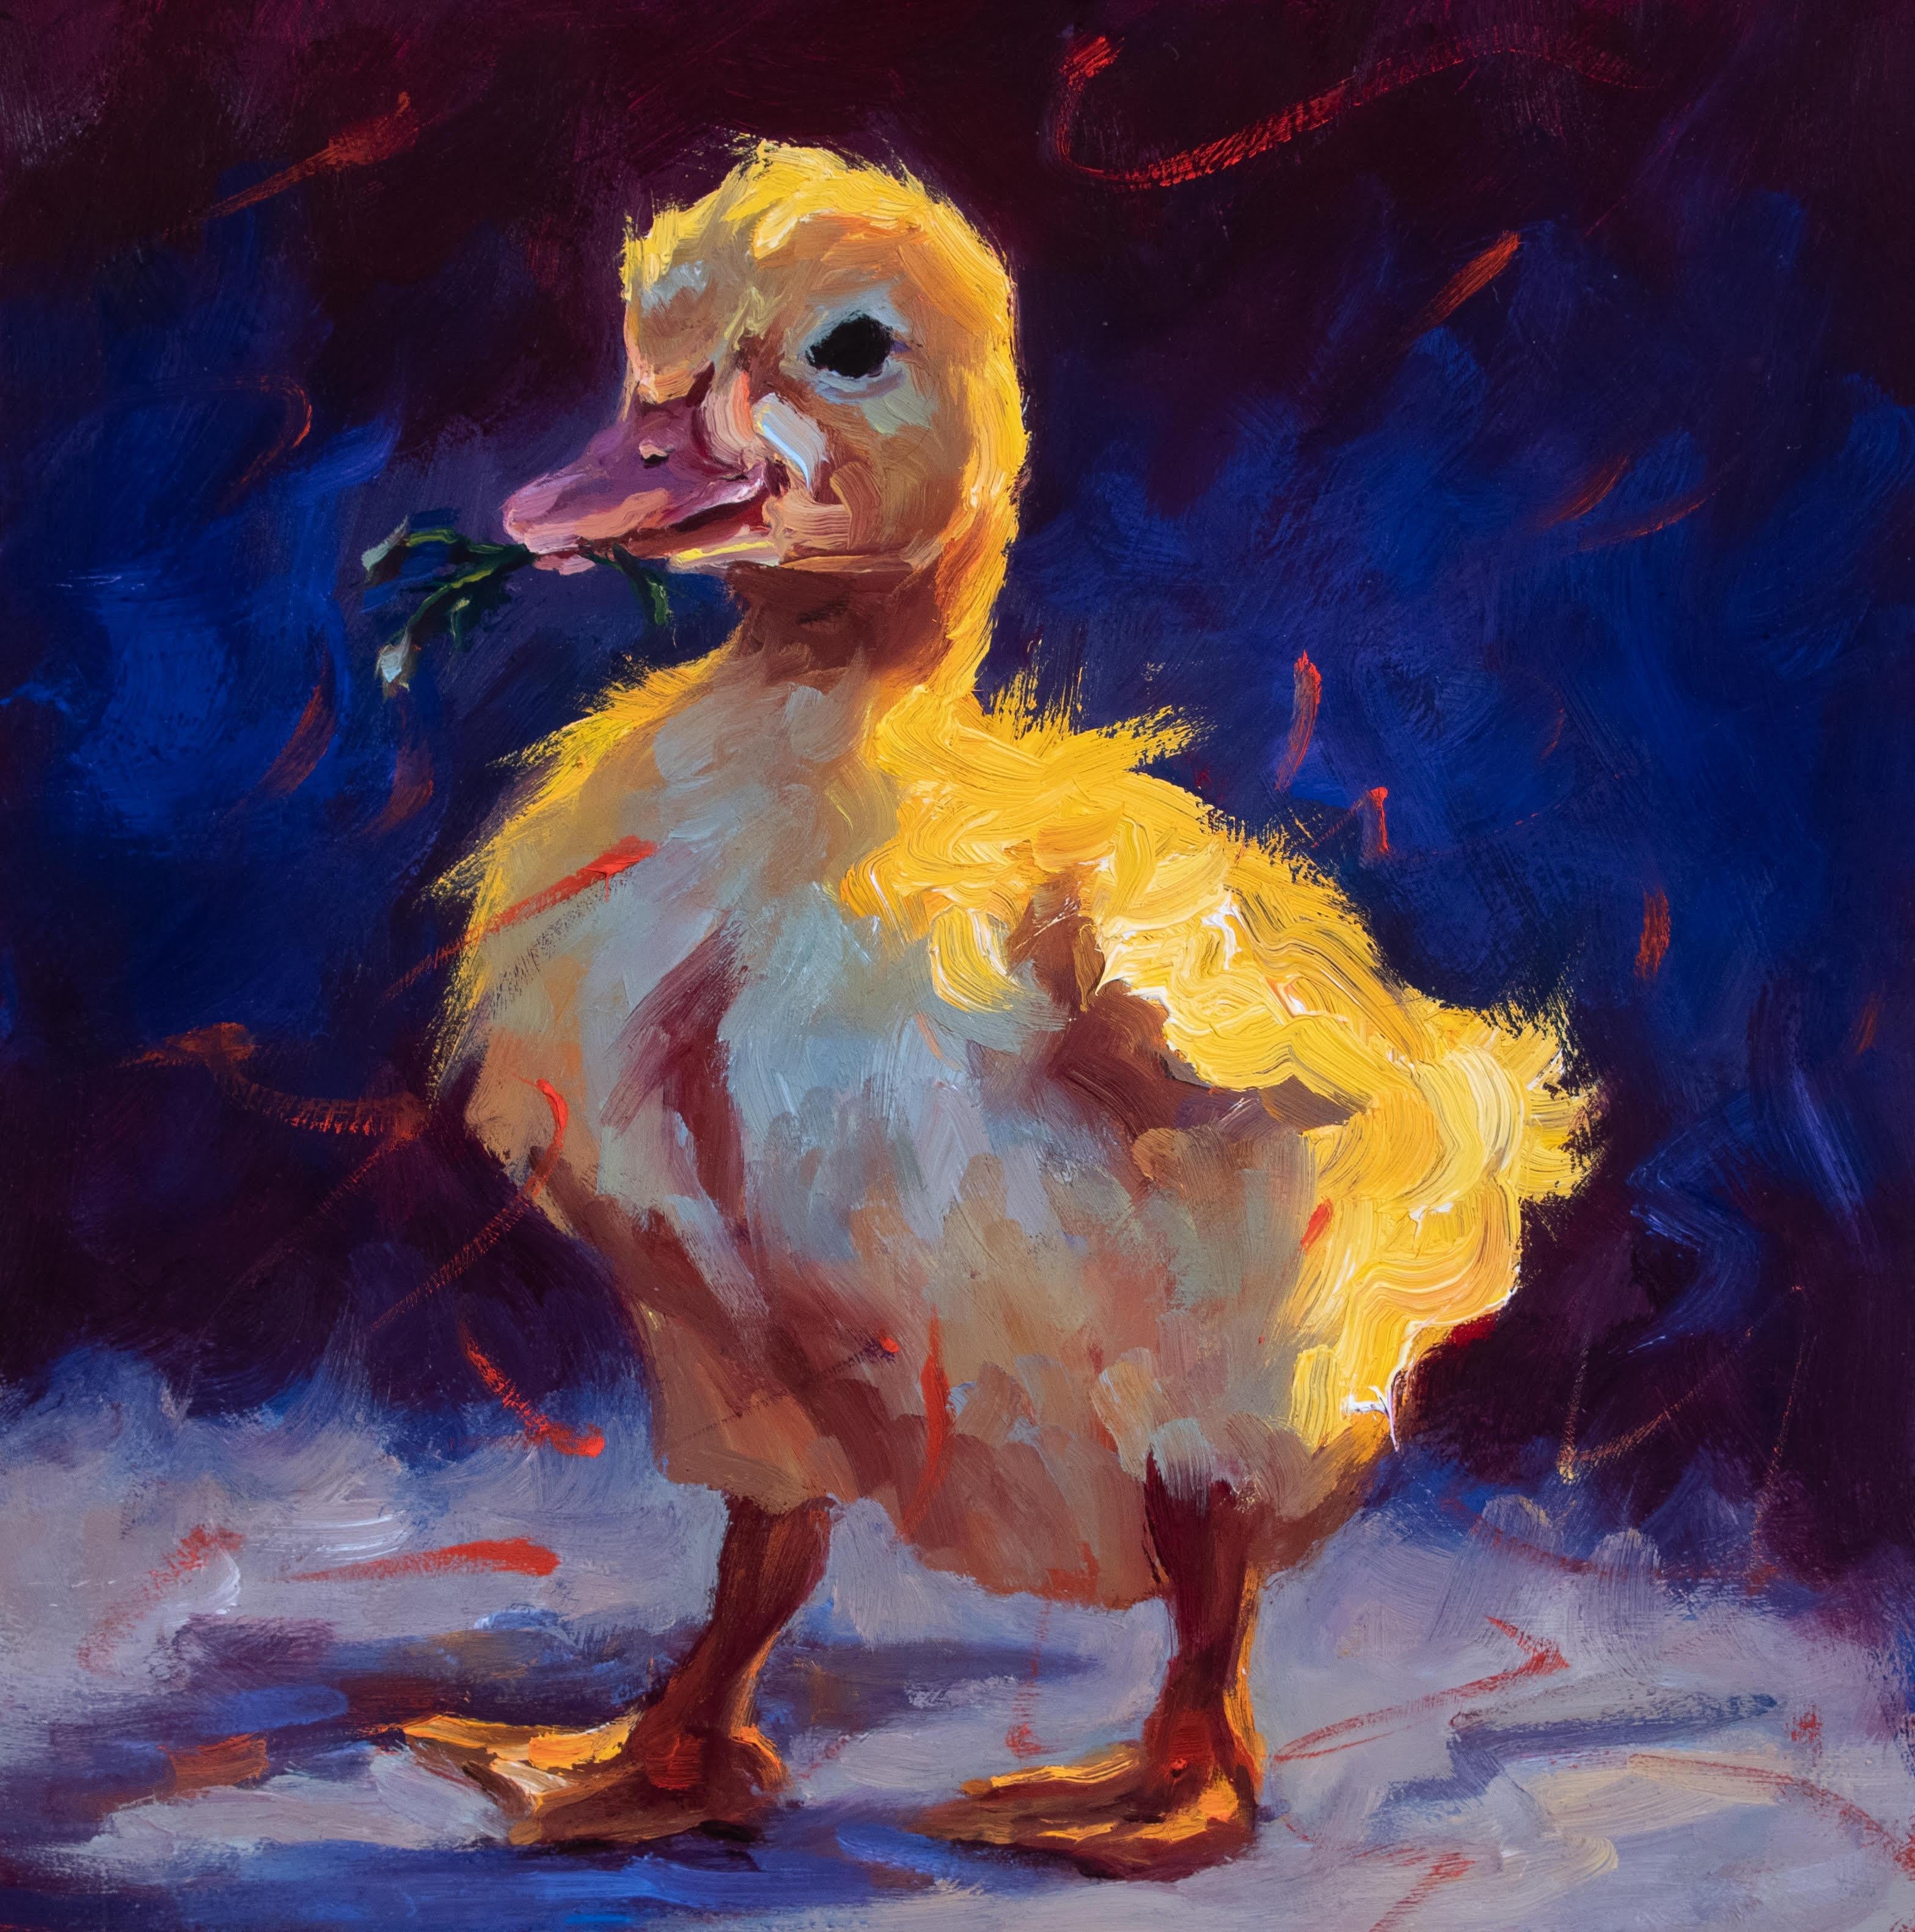 Cheri Christensen Animal Painting - "Spring" Oil painting of a yellow chick with grass in its beak and dark back